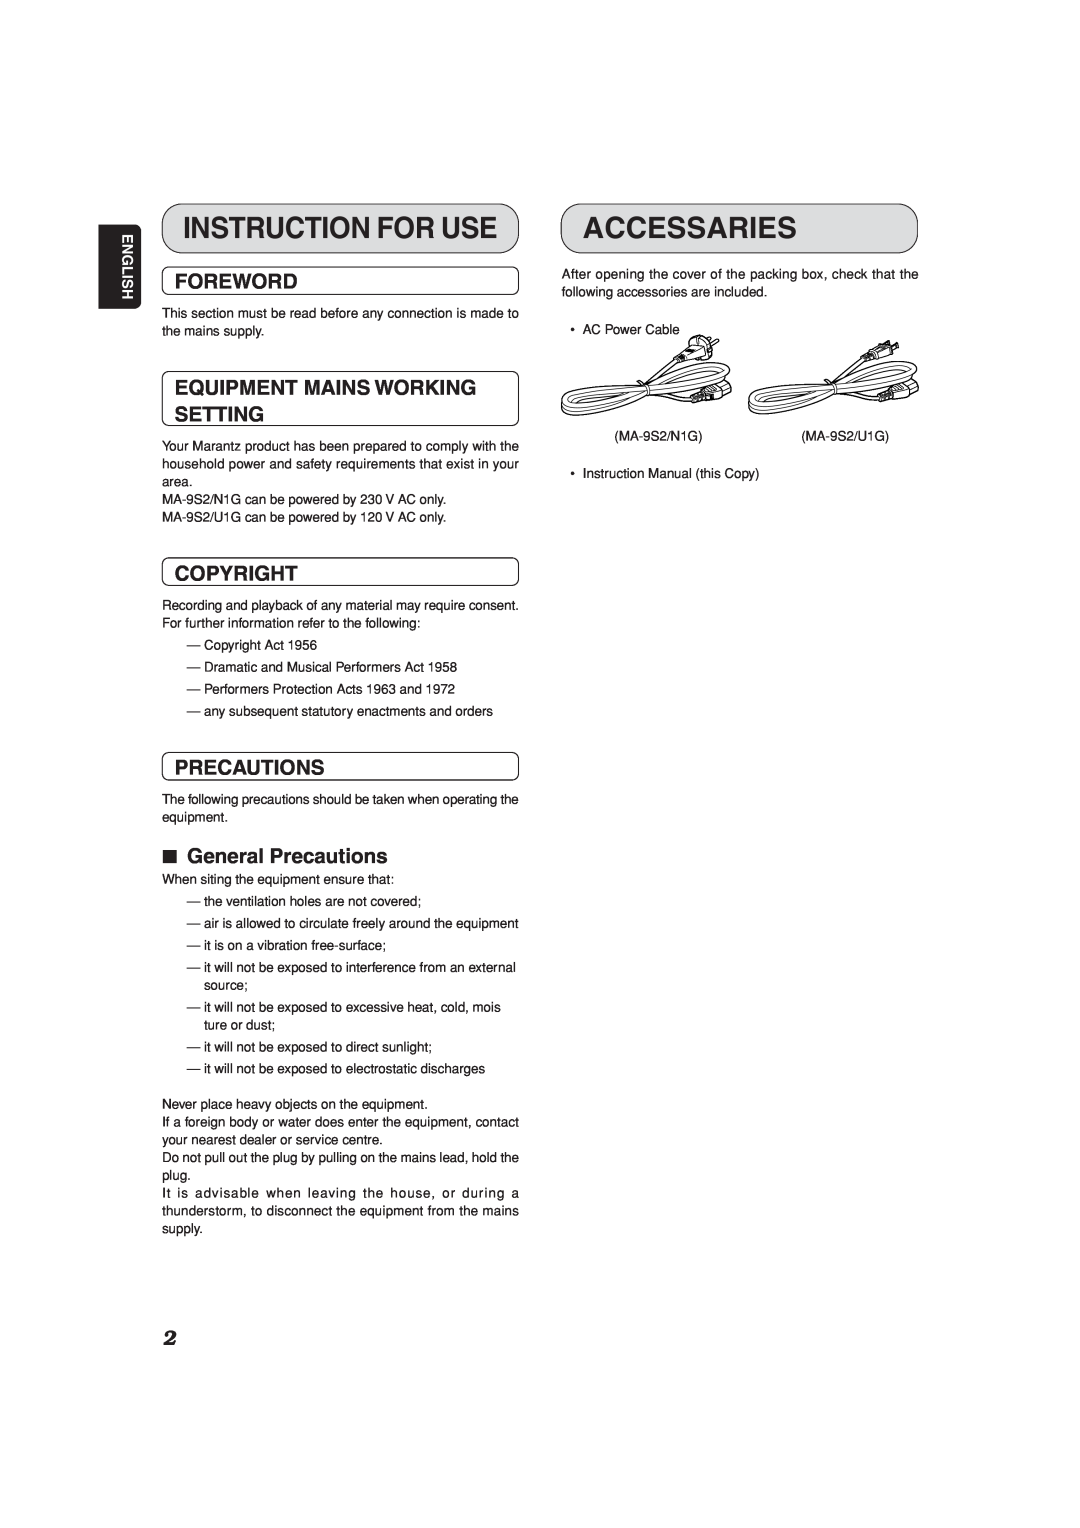 Marantz MA-9S2 manual Instruction For Use, Accessaries, Foreword, Equipment Mains Working Setting, Copyright, Precautions 